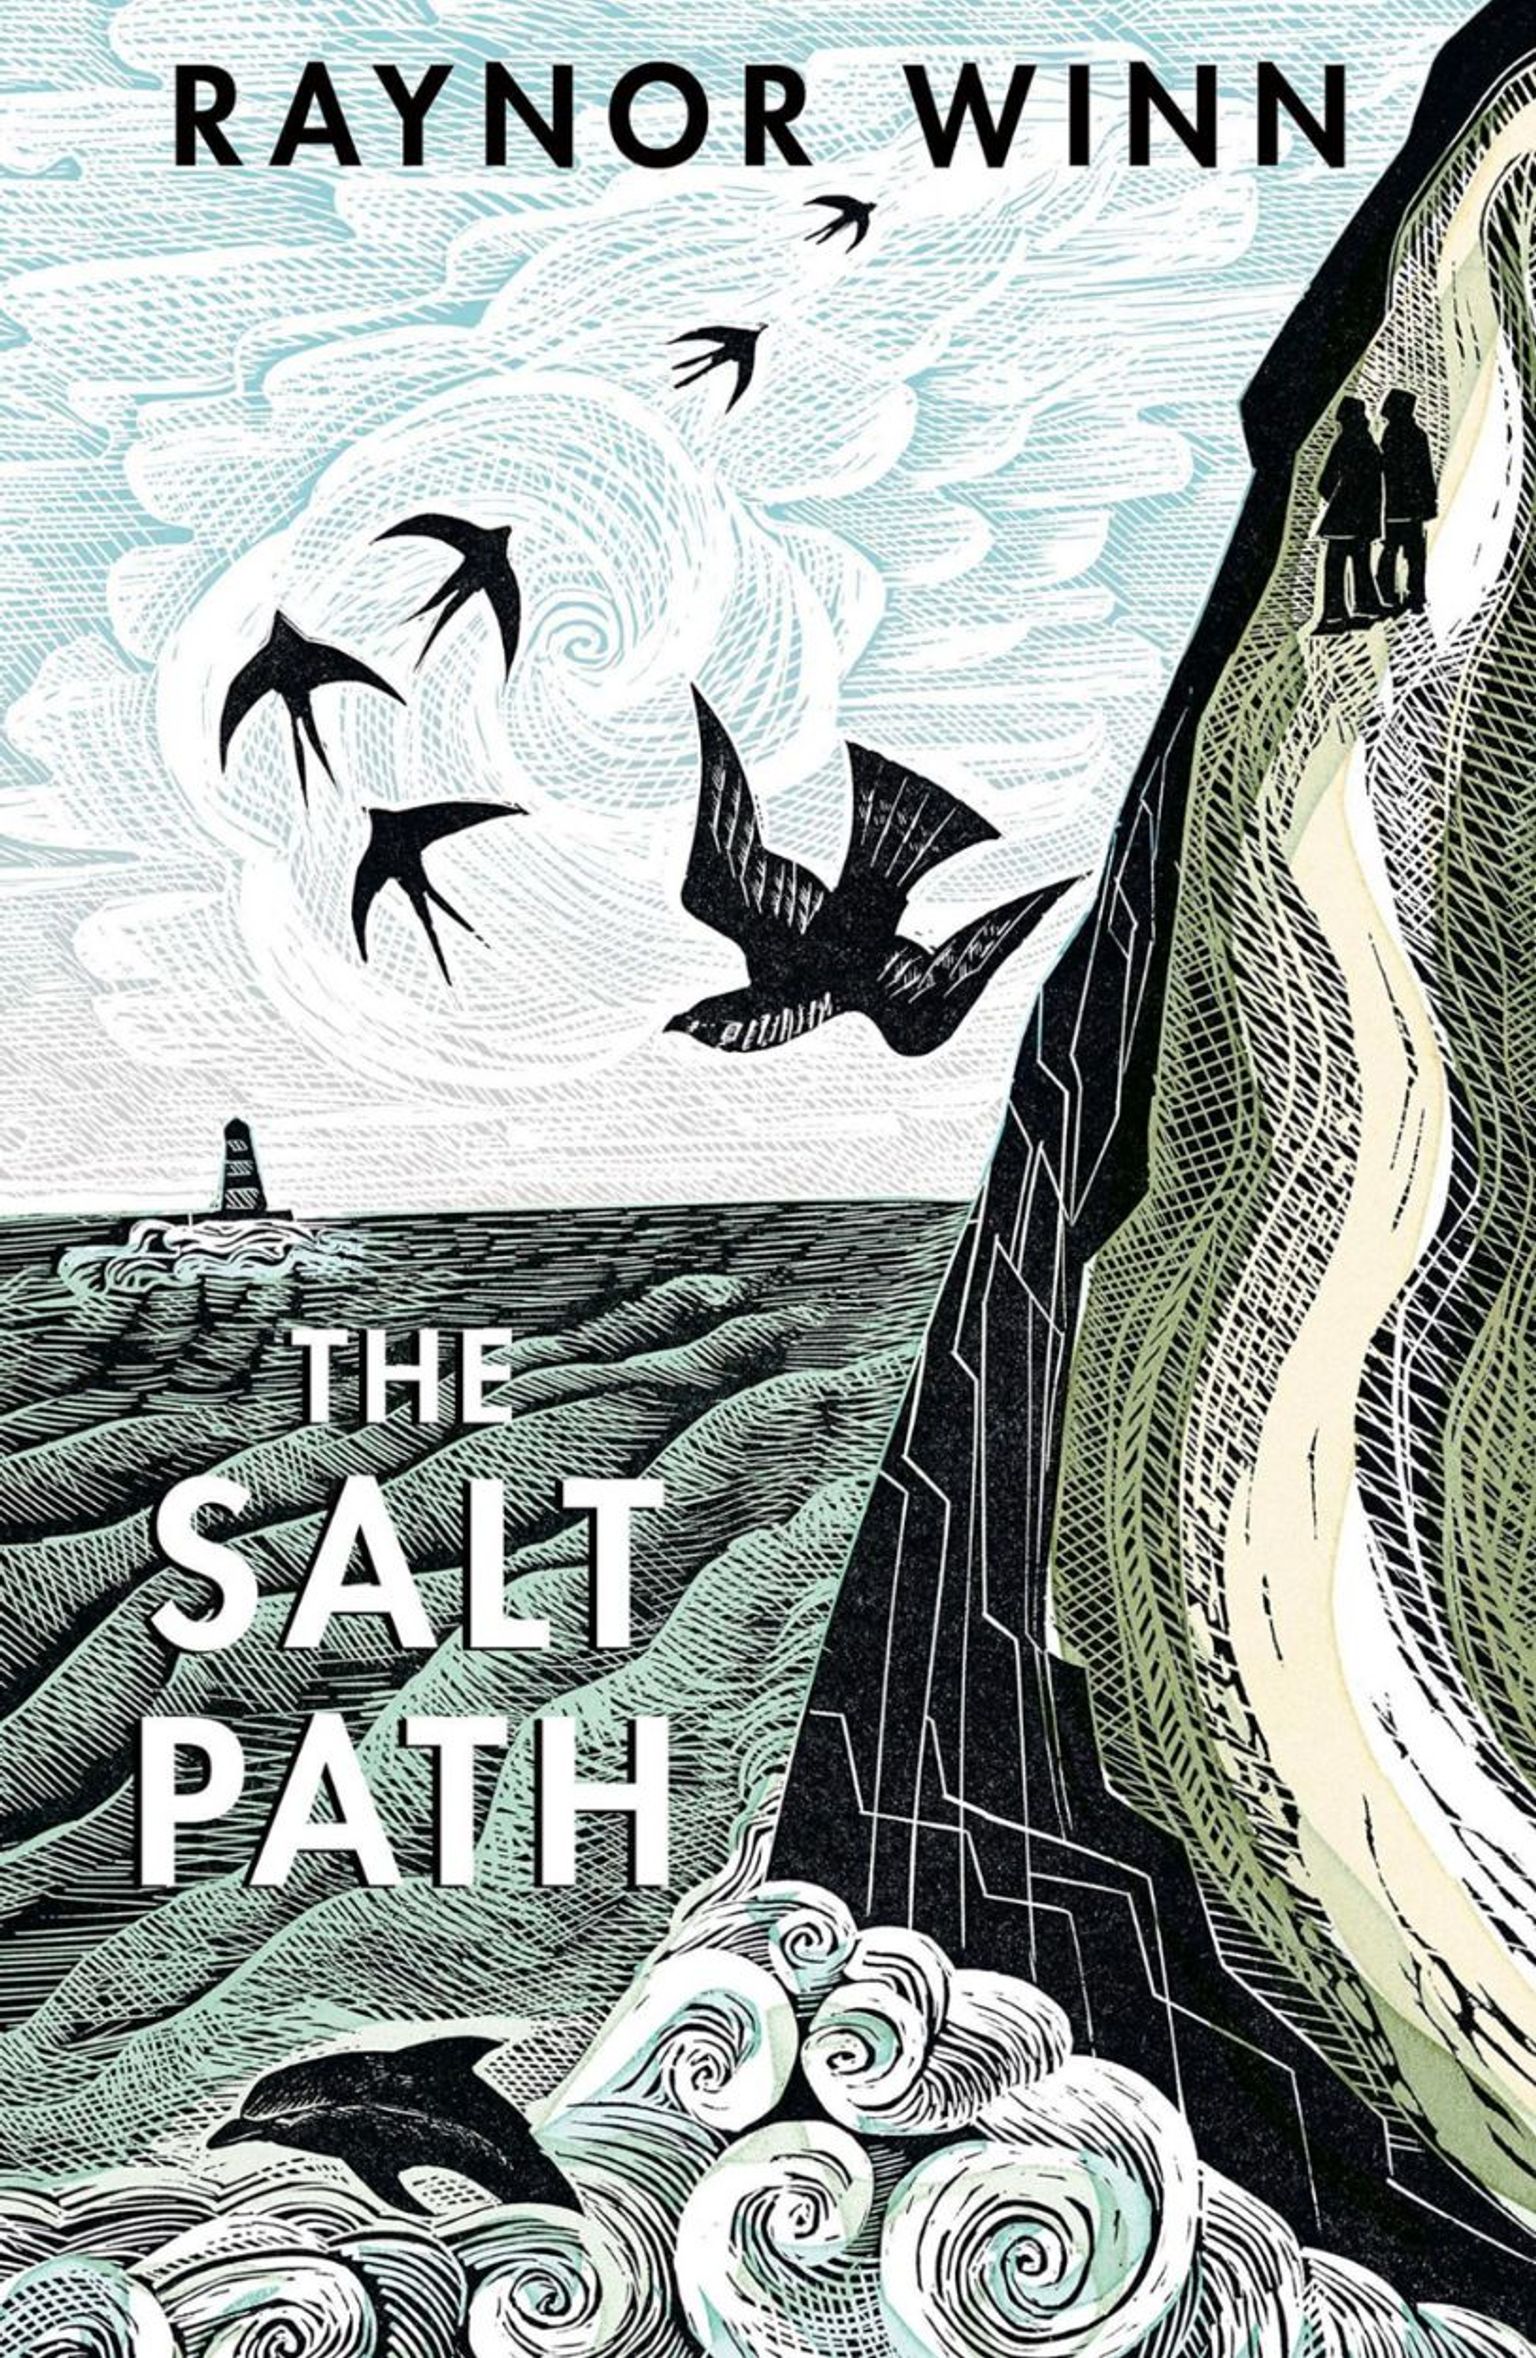 Book Recommendations - The Salt Path